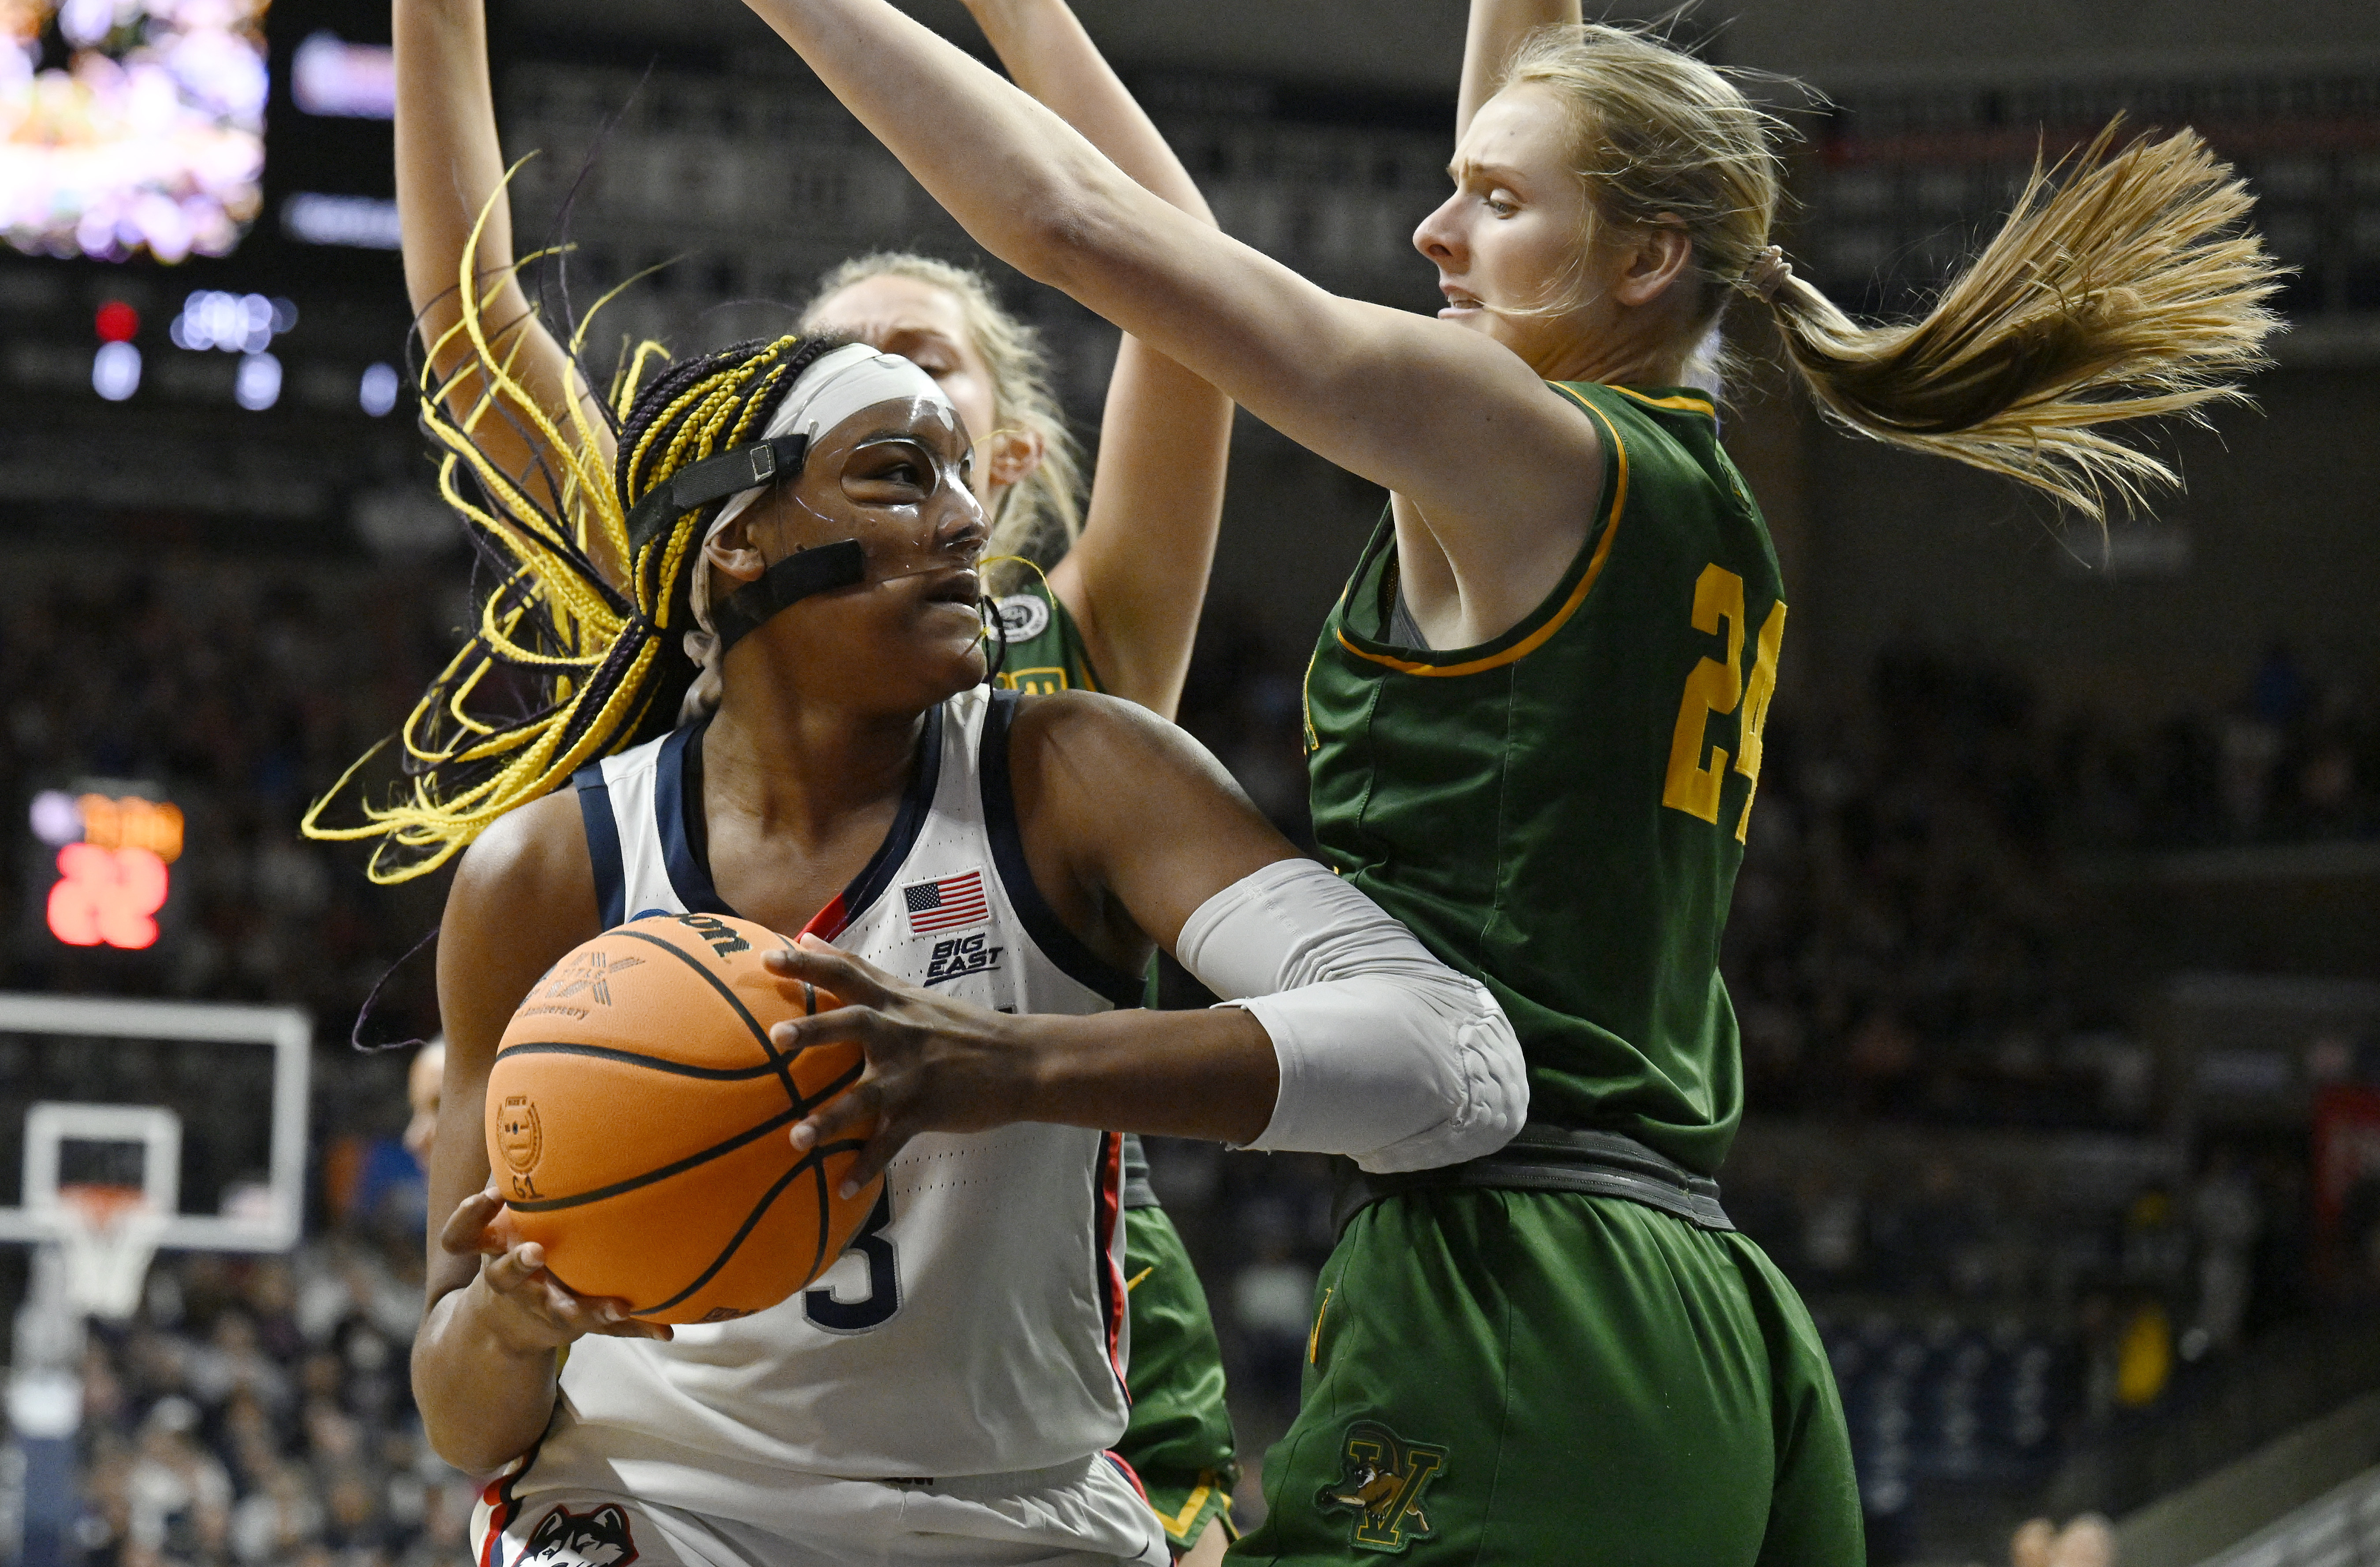 UConn Women, Baylor Meet Tonight, 2 Years After Close March Madness Clash